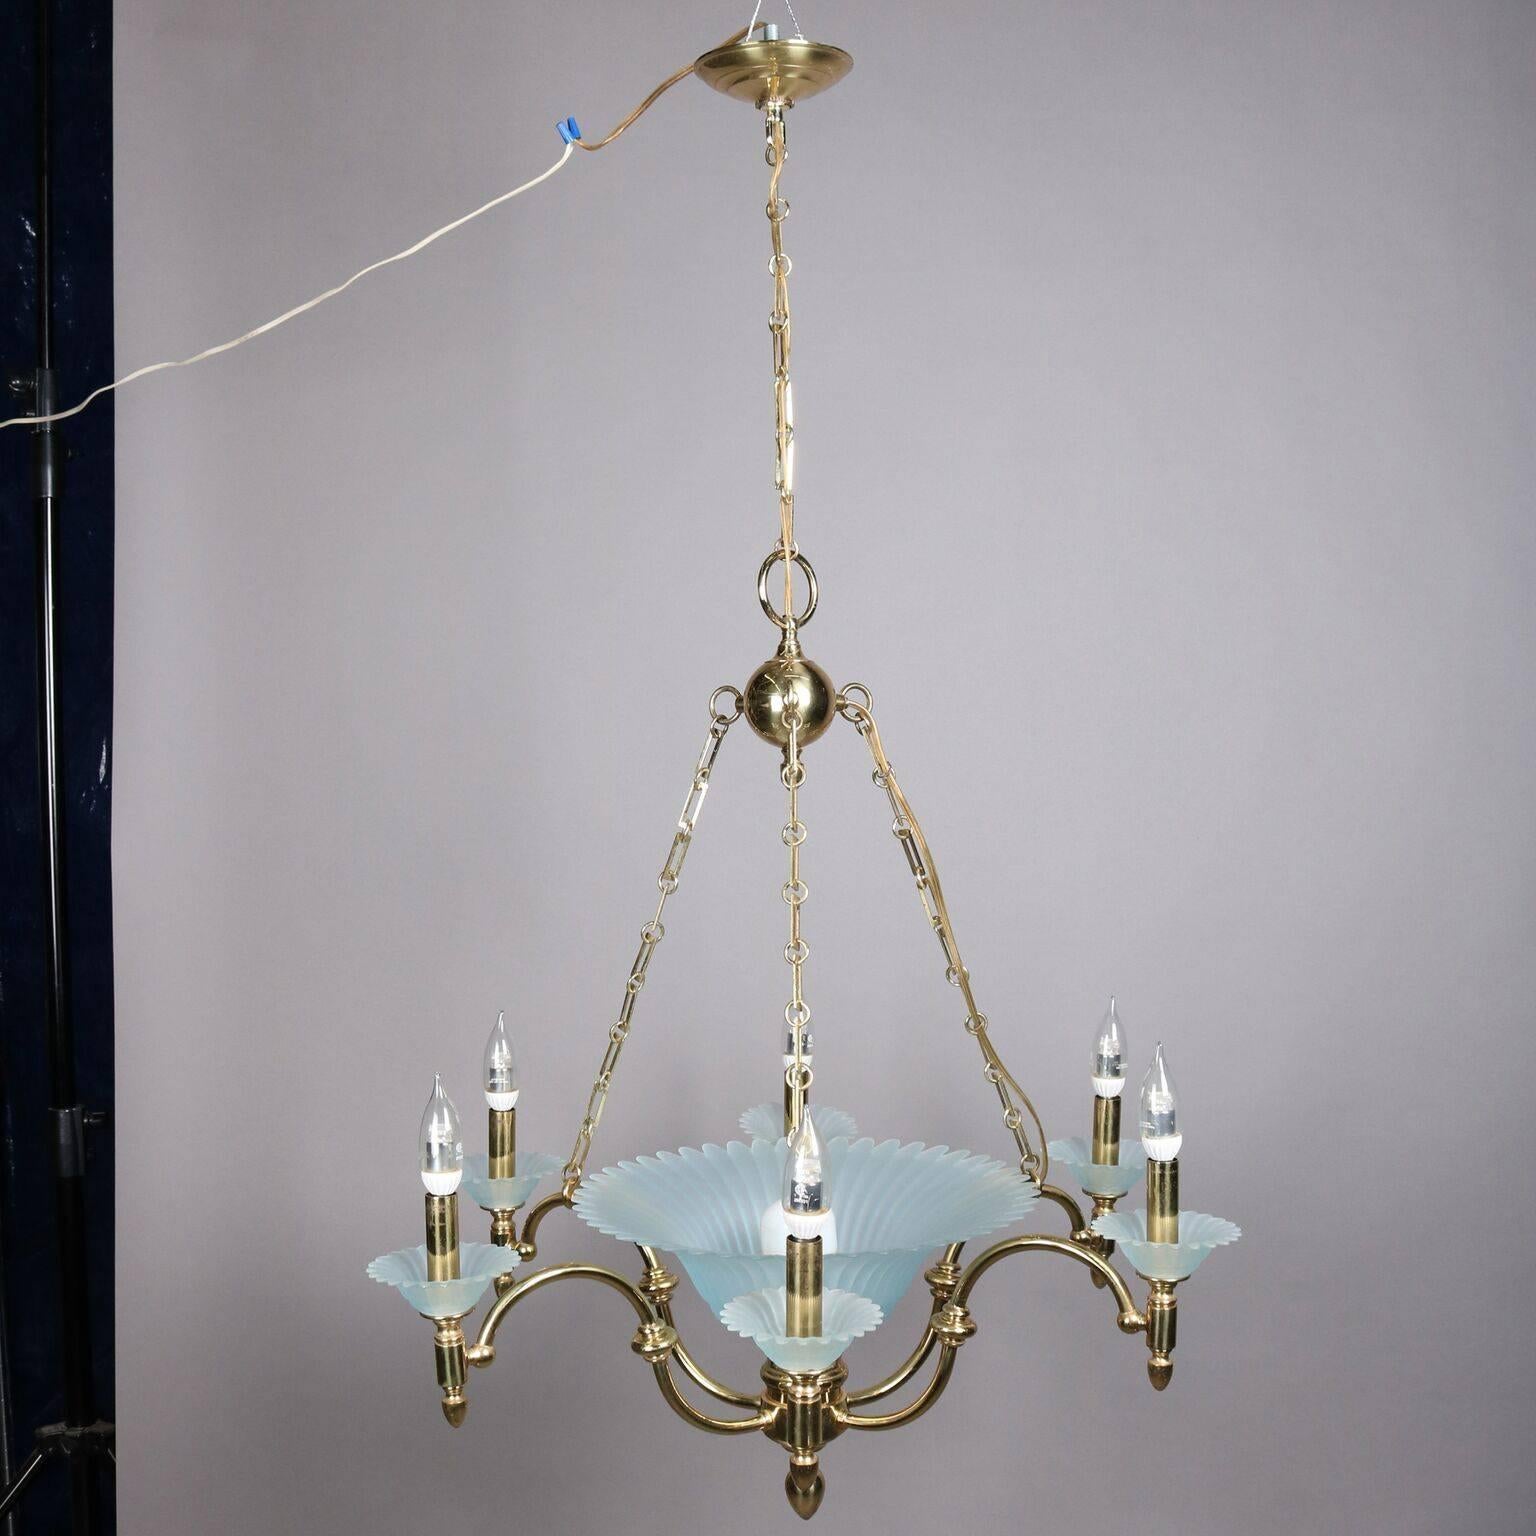 Hollywood Regency chandelier features brass frame with central fluted aqua opalescent glass ribbed bowl with six scroll form arms terminating in candle lights with matching glass bobeches, 20th century

Measures - 46" drop, 28".